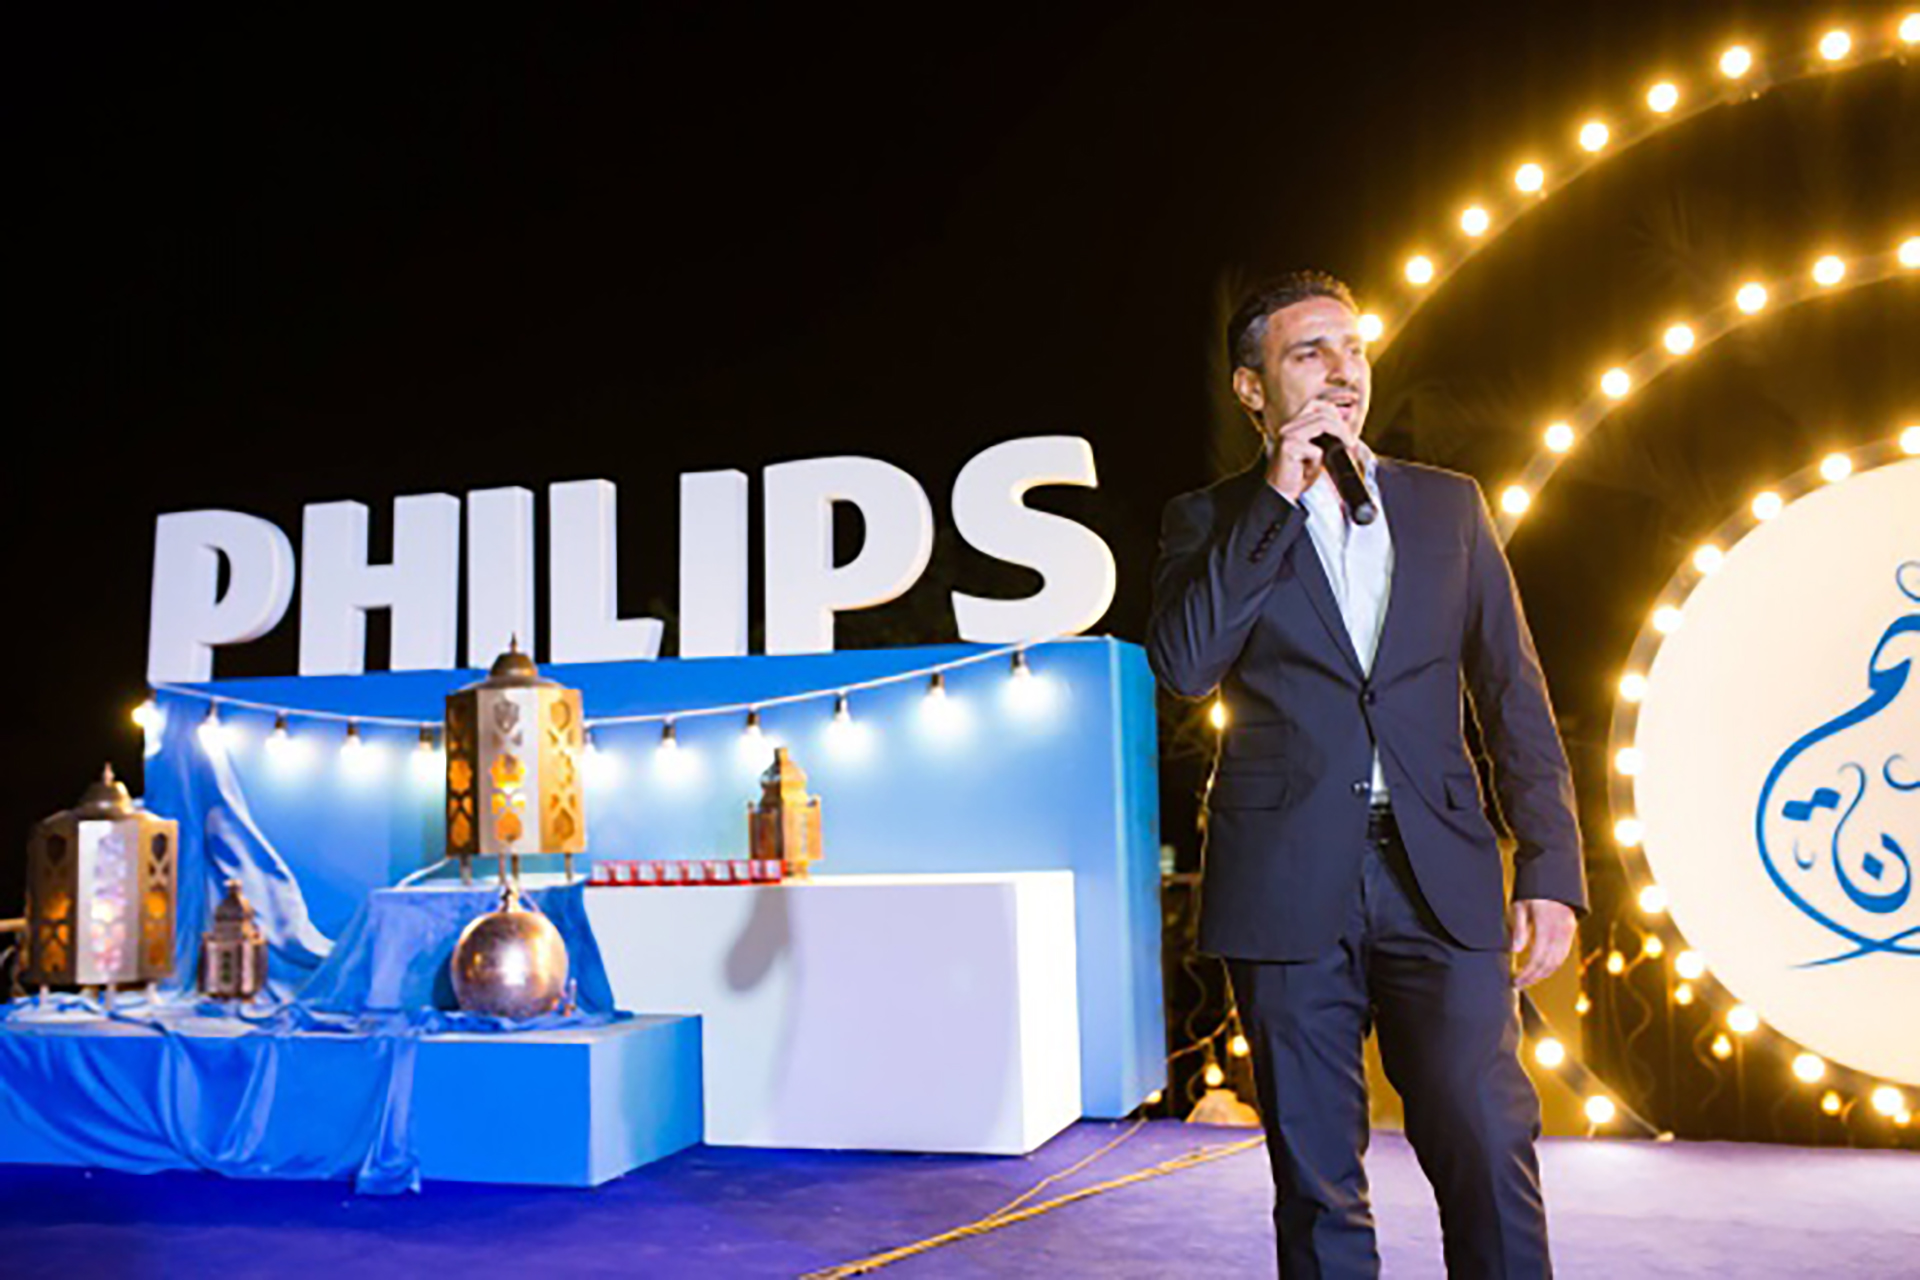 Philips Lighting has celebrated its local retailers